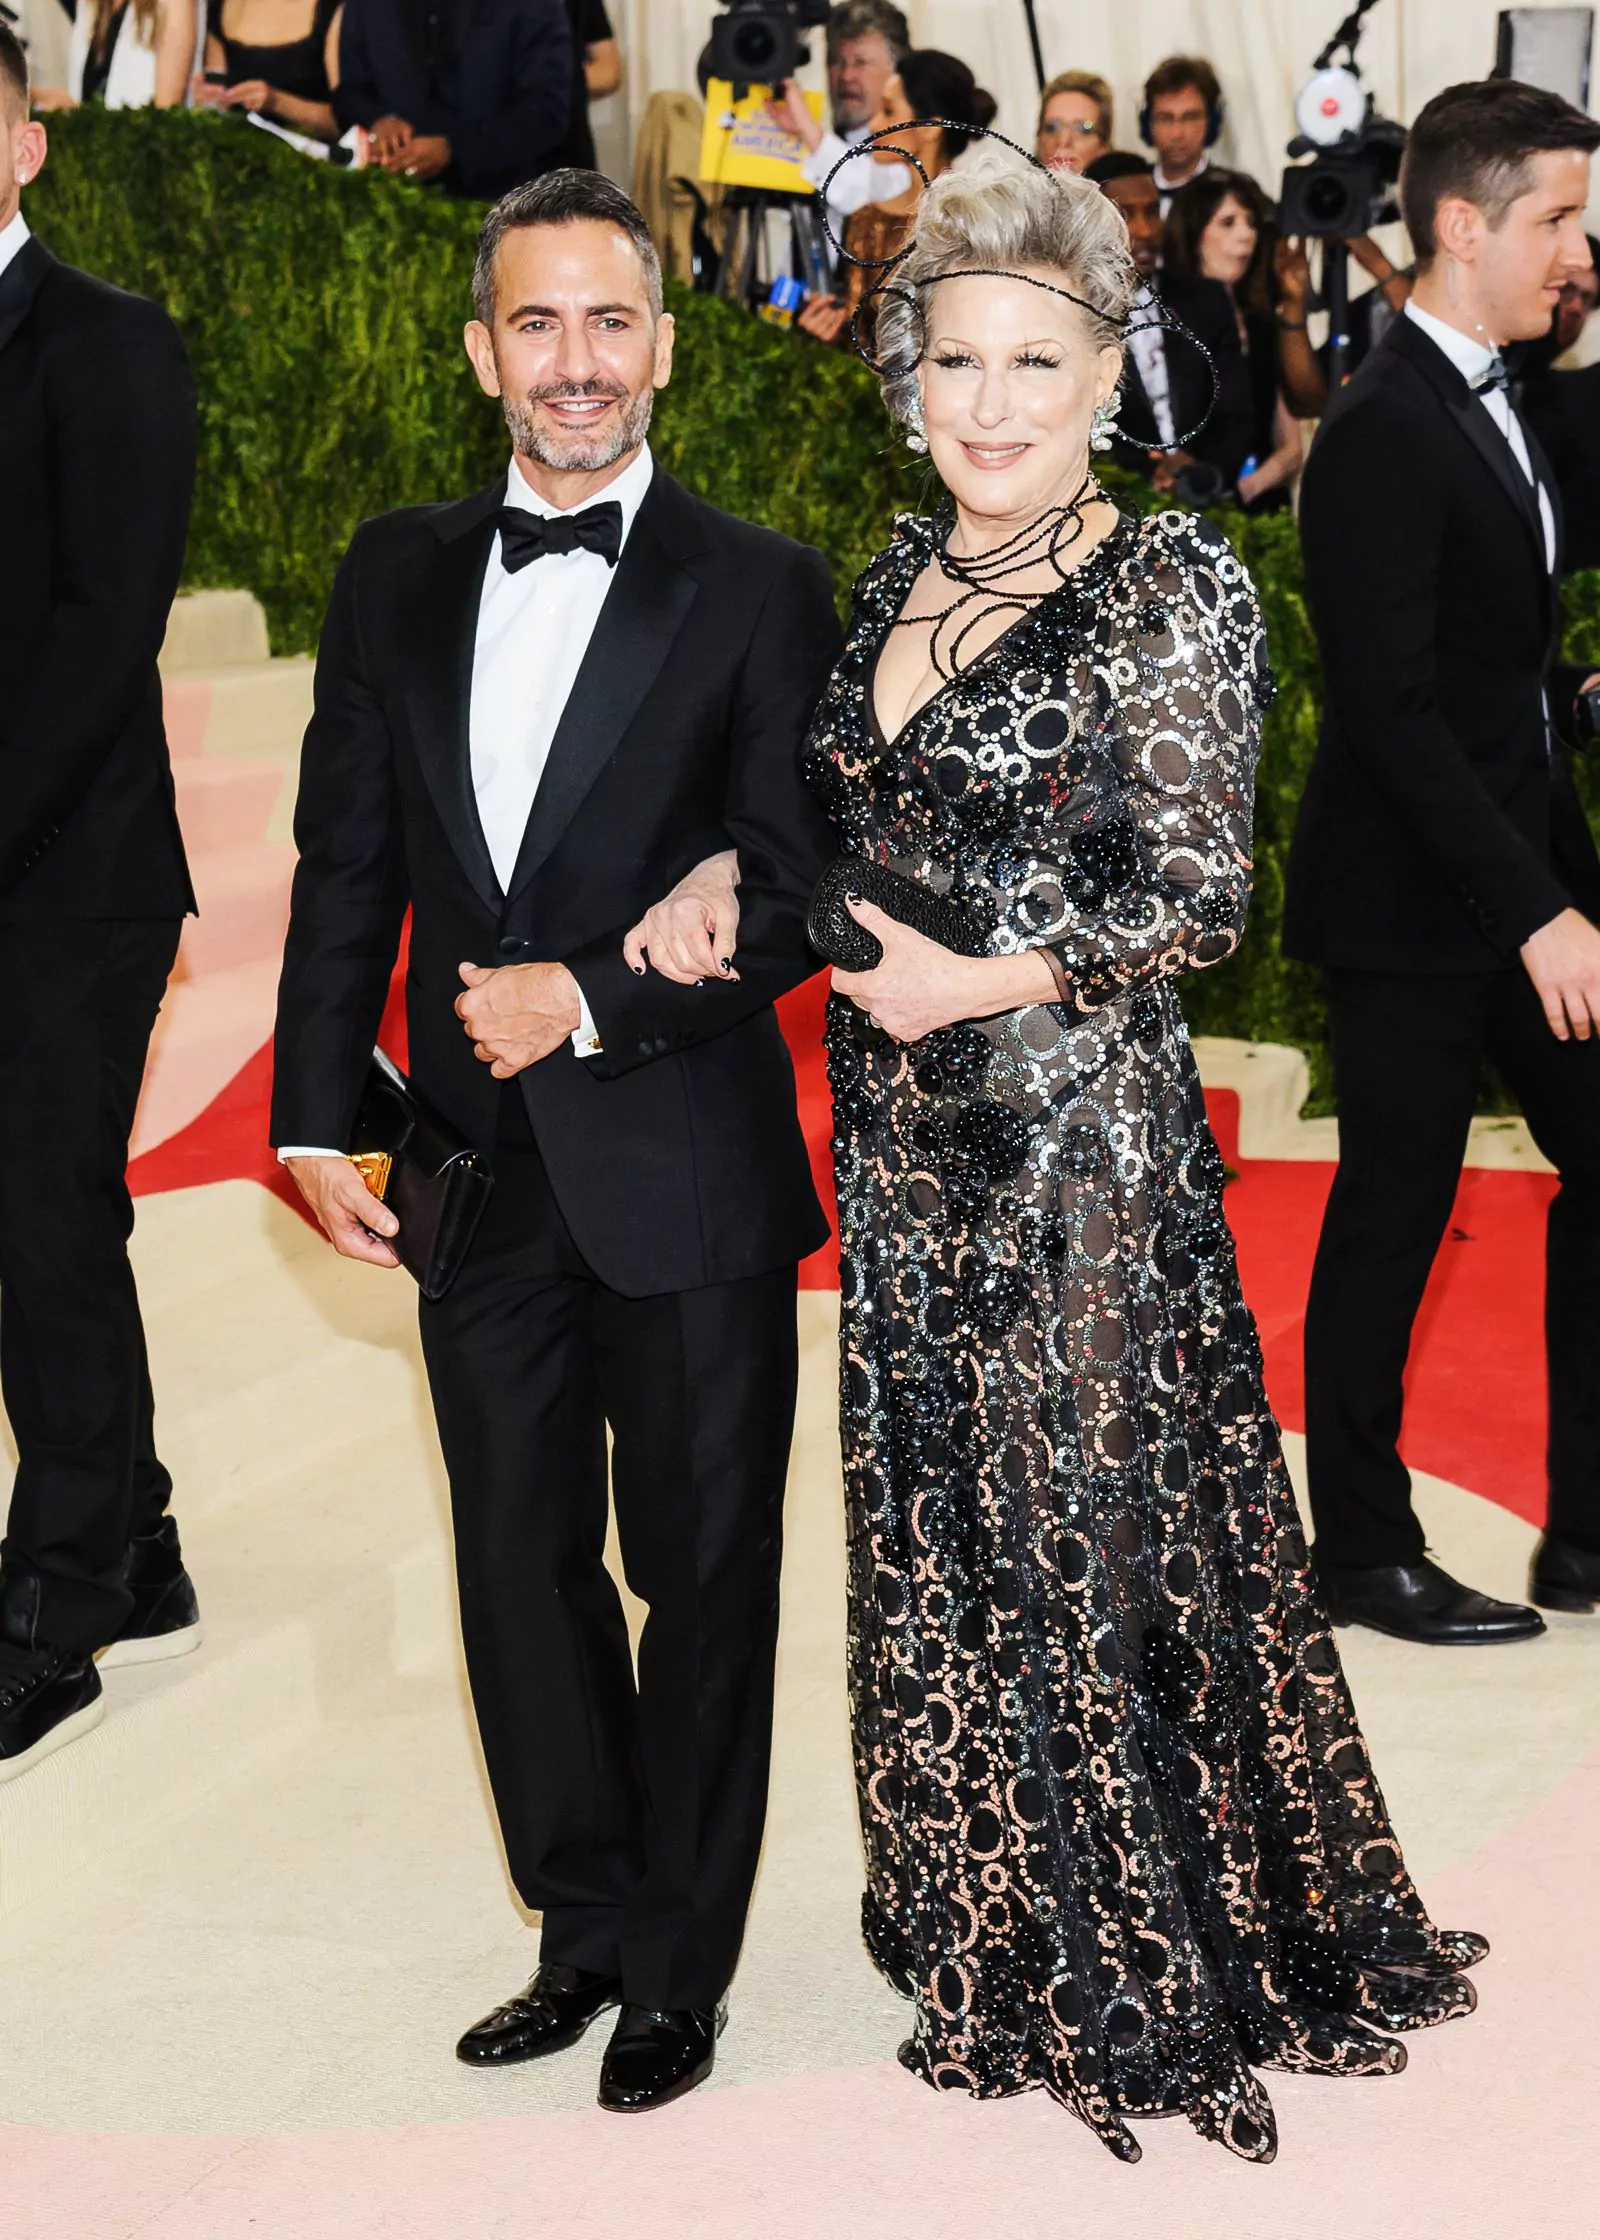 Marc Jacobs and Bette Midler at the Costume Institute Gala in New York, May 2, 2016.